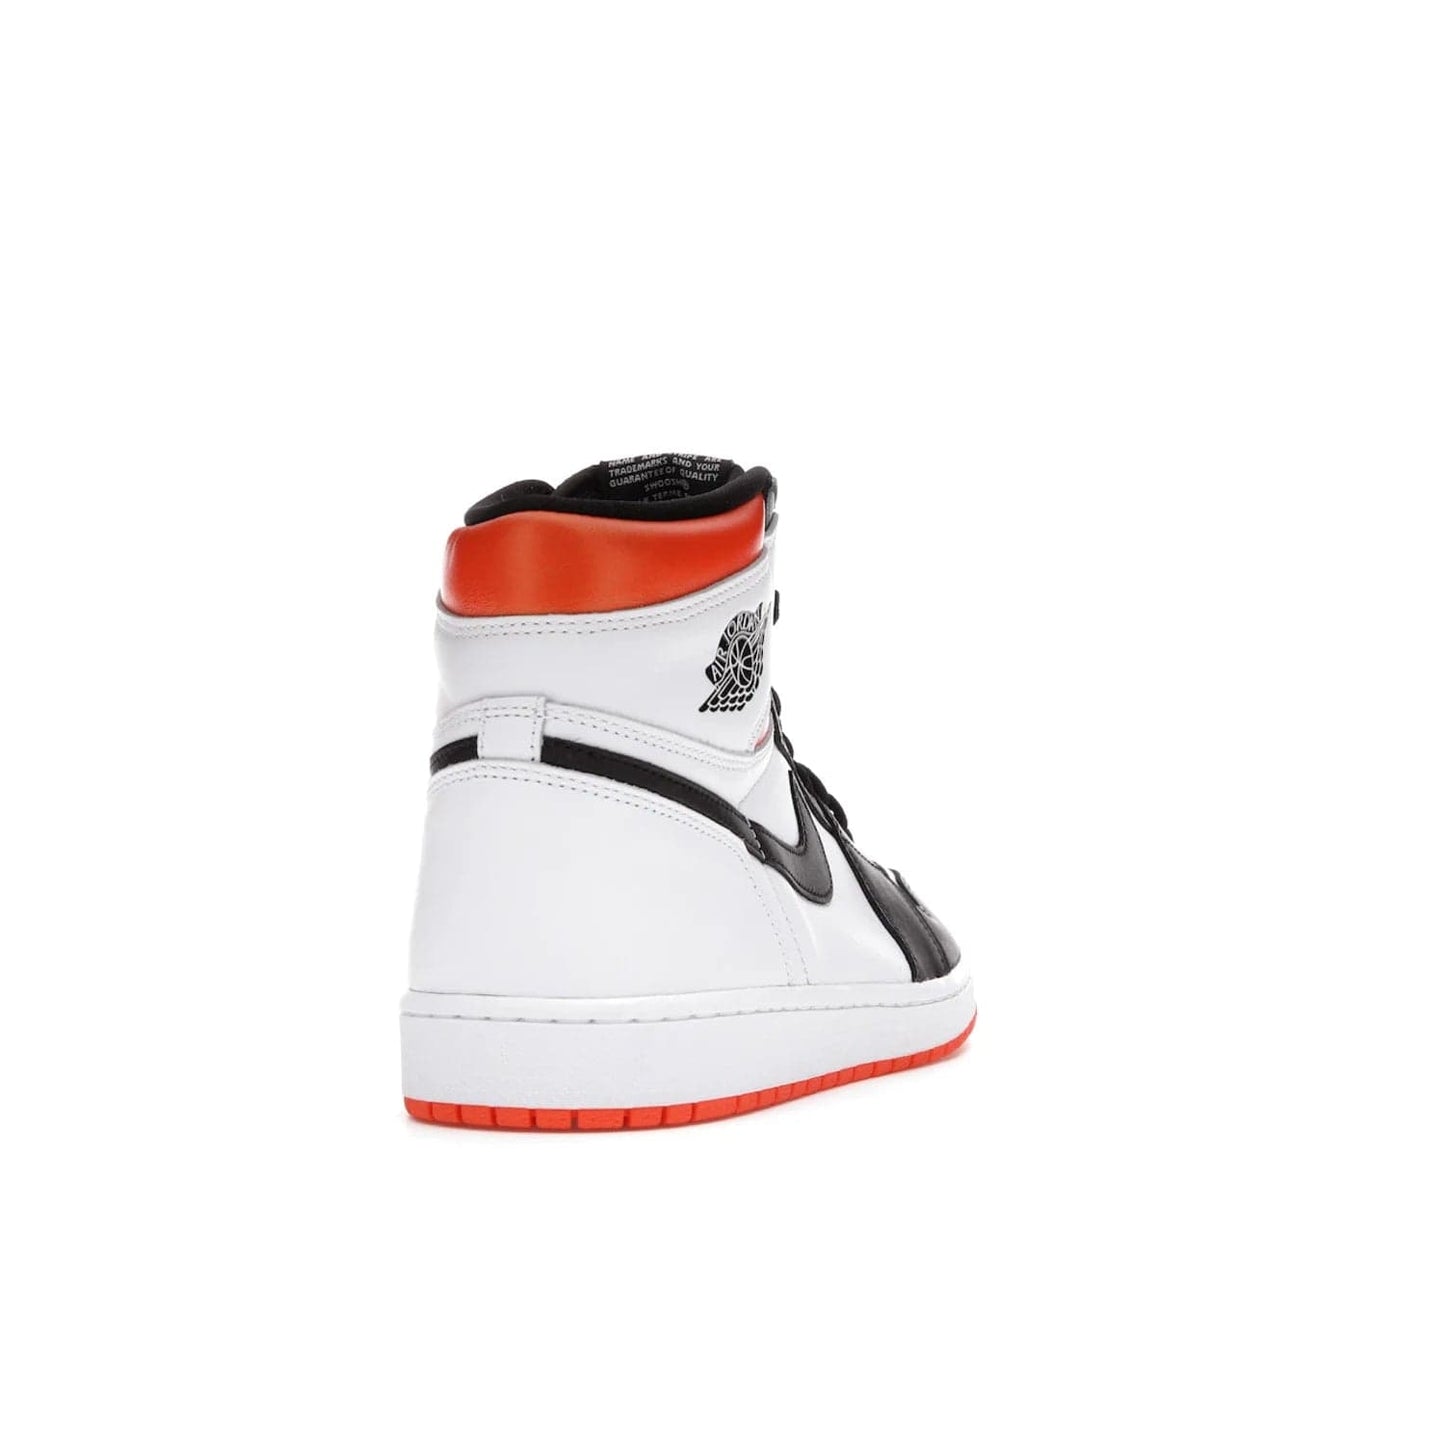 Jordan 1 Retro High Electro Orange - Image 30 - Only at www.BallersClubKickz.com - This Air Jordan 1 Retro High Electro Orange features a white leather upper with black overlays and vibrant Hyper Orange ankle wrap. Turn heads with this iconic design of woven tongue label and sole. Get yours today and add some serious style to your rotation.